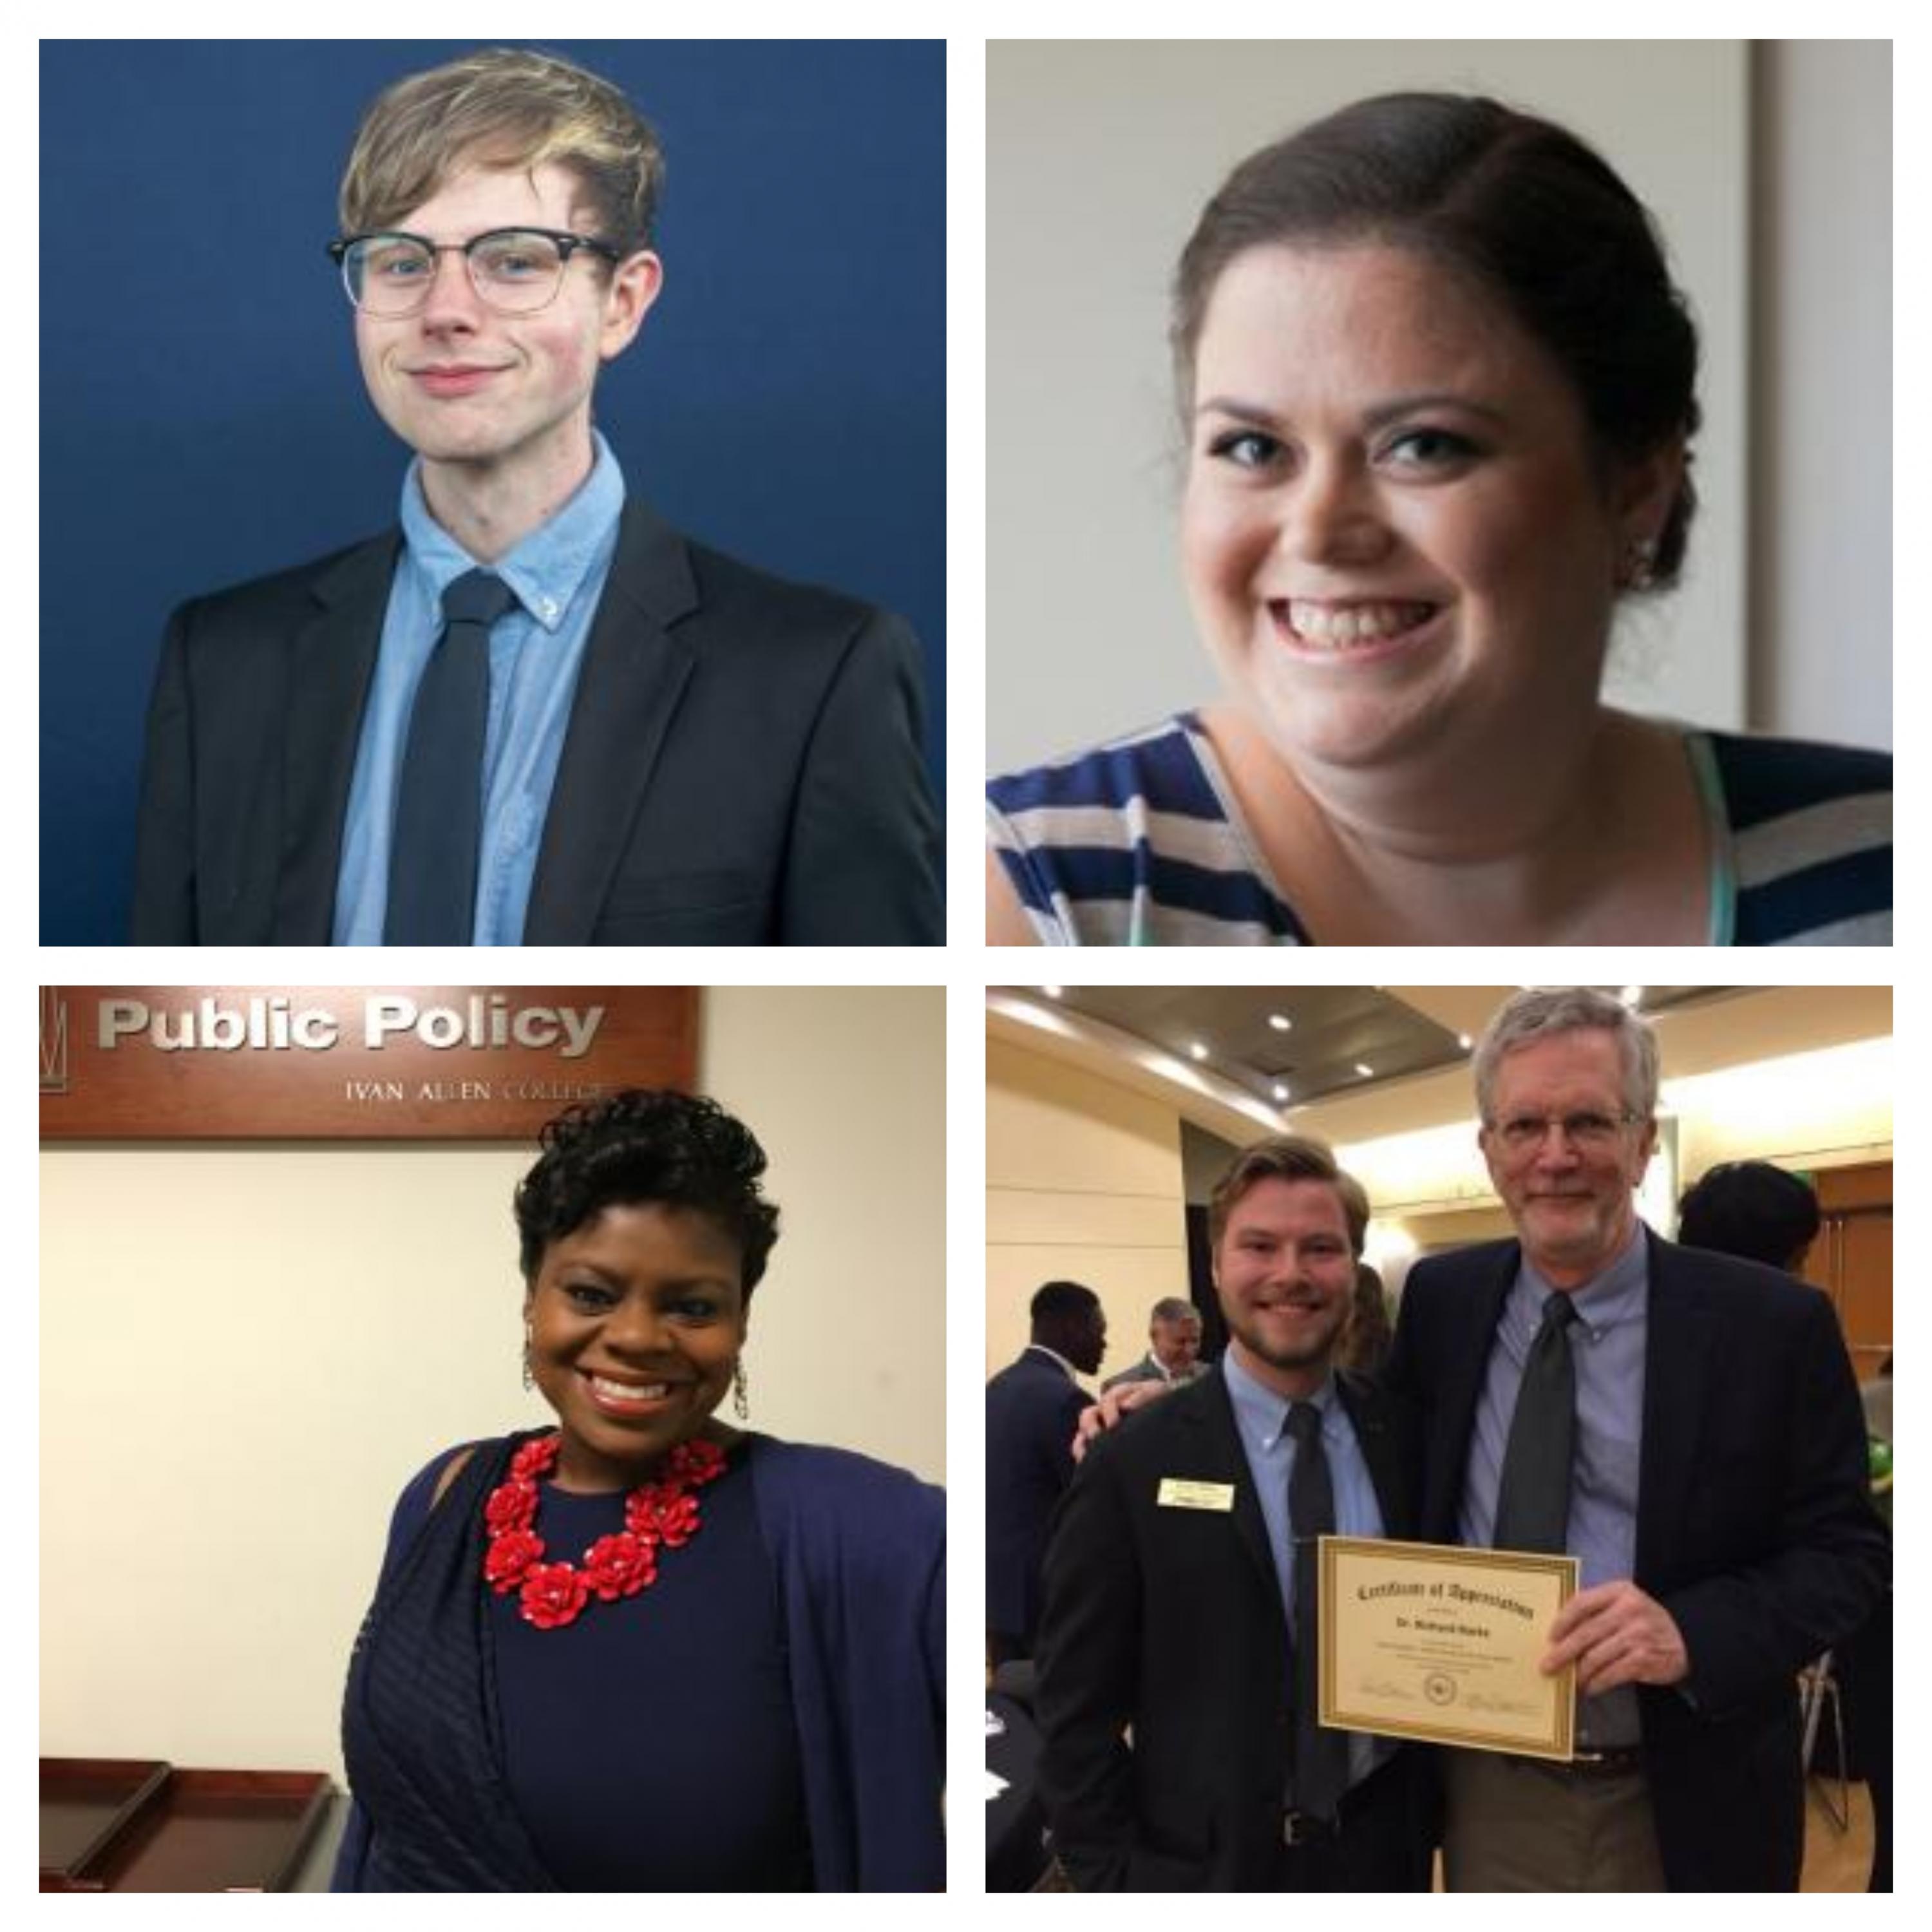 Awards for the Faculty, Staff and Students - 2019 School of Public Policy